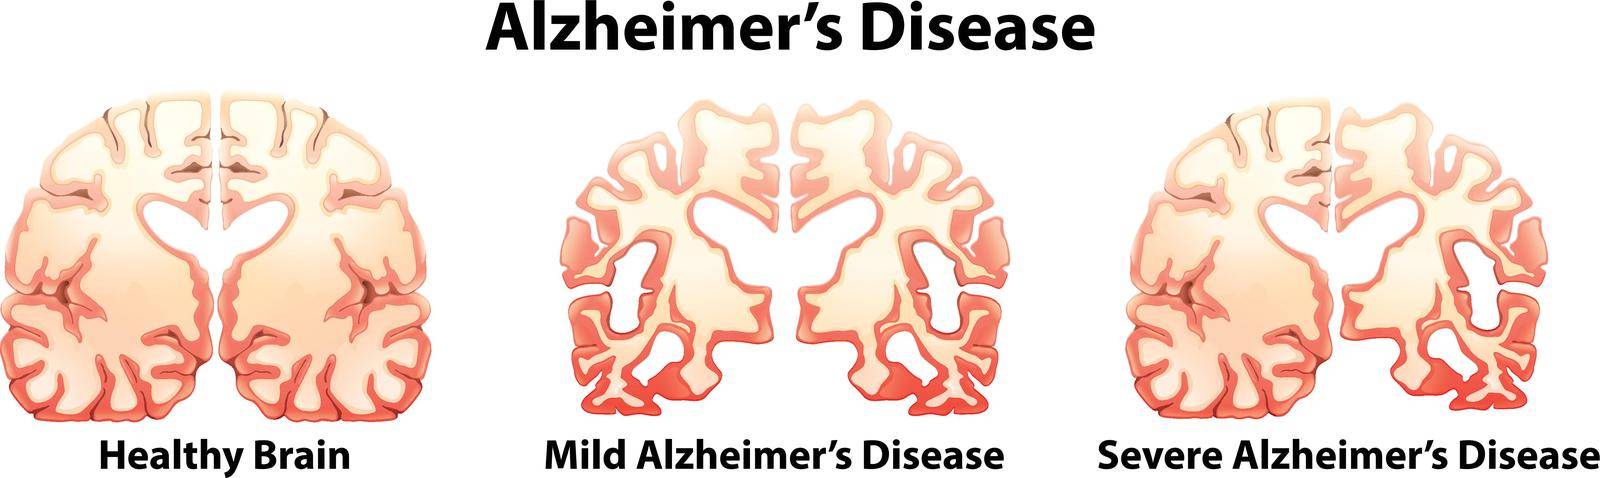 Illustration of the alzheimer's Disease on a white background